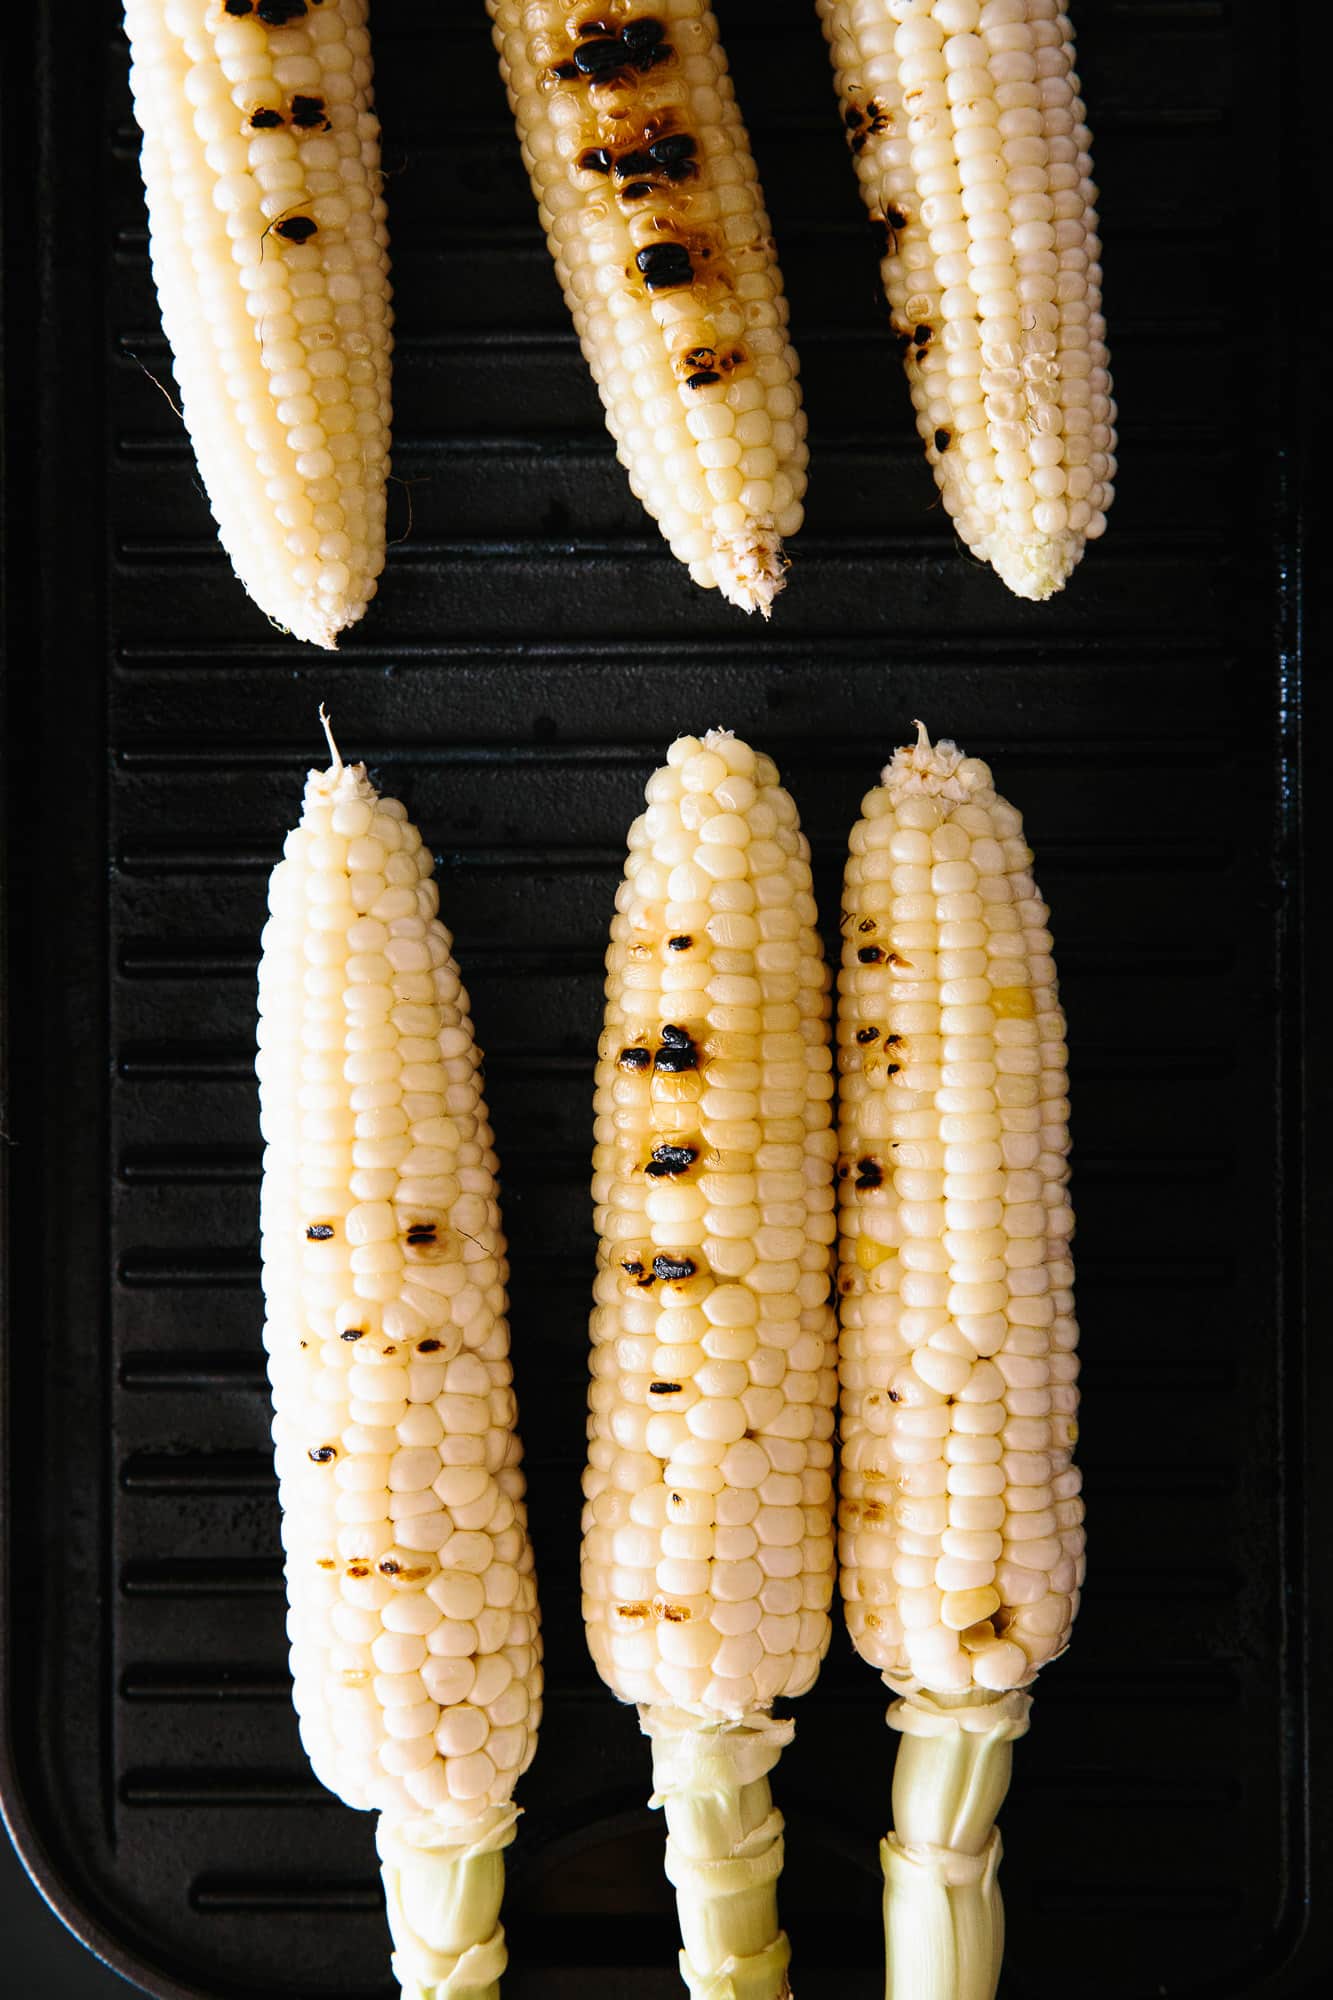 How to make an elote corn